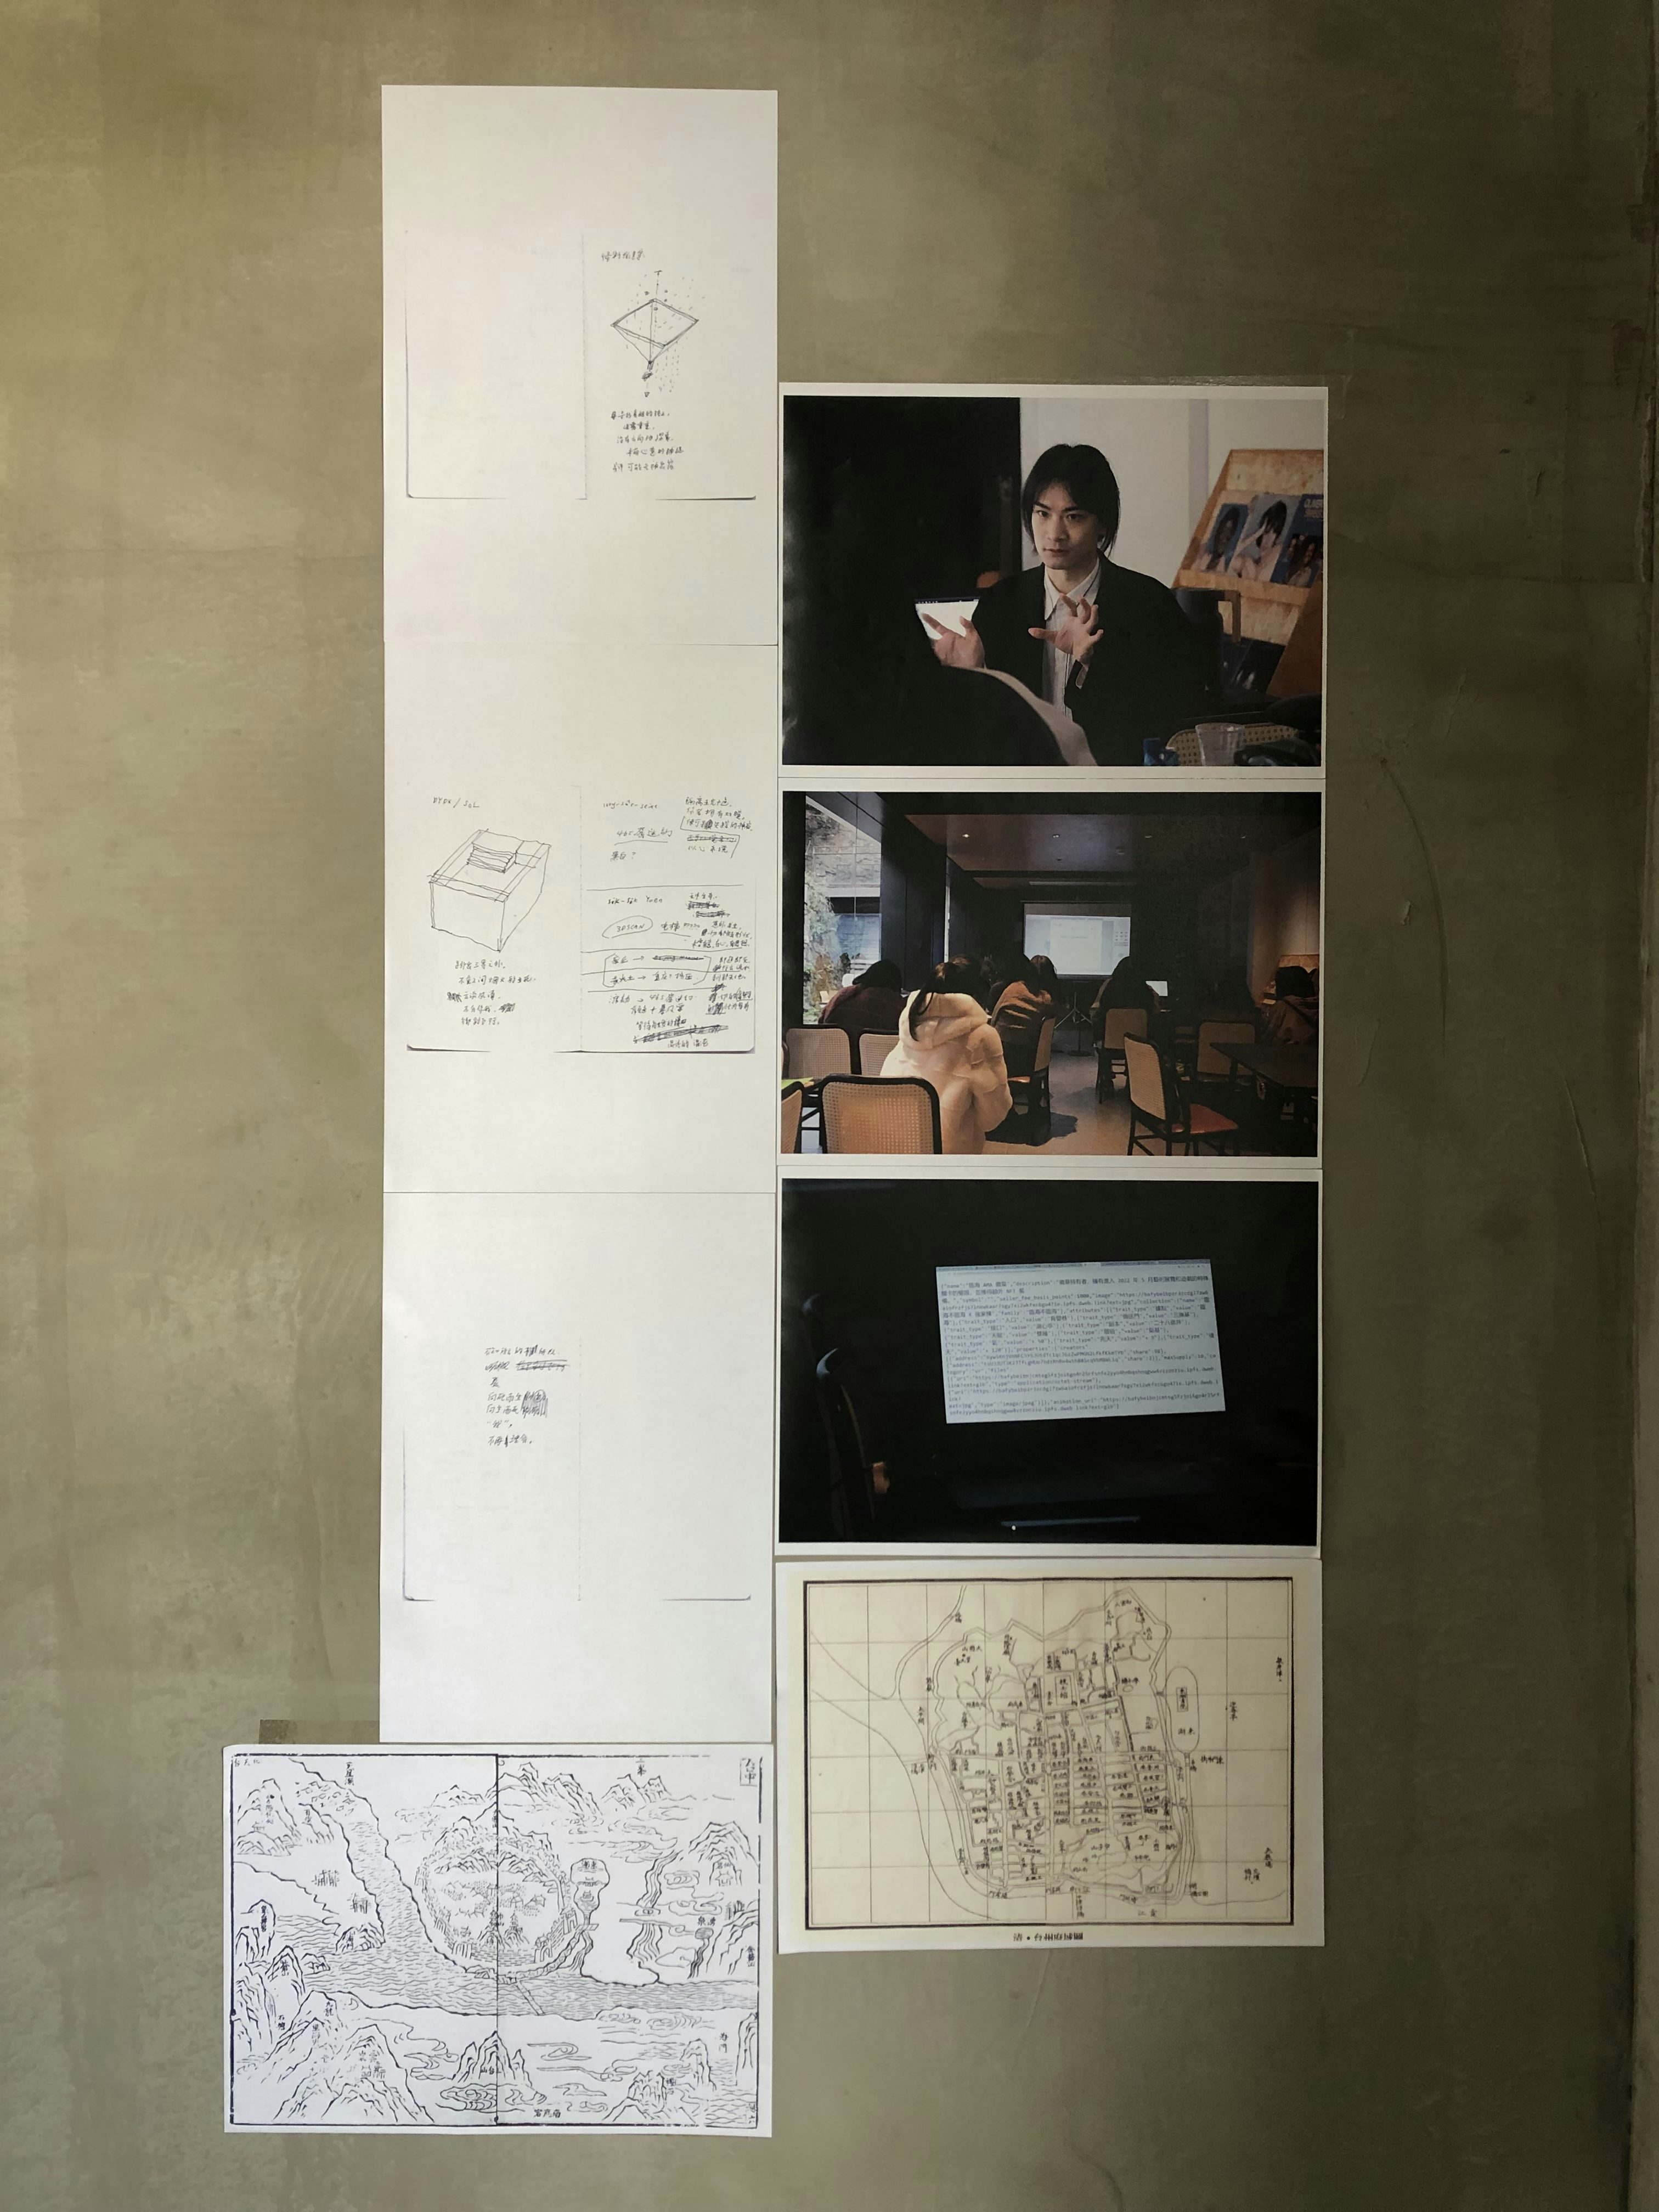 Site analysis and design process, The research workshop is linked to POAP (https://solscan.io/address/EvhtCCM7qzhedW7edh6FcMK4ri5FgjPq91GBnrz1FCDp), Linhai, Zhejiang, China, 2022, Courtesy of the artist, Fengyuan Tian, and With in/out Linhai